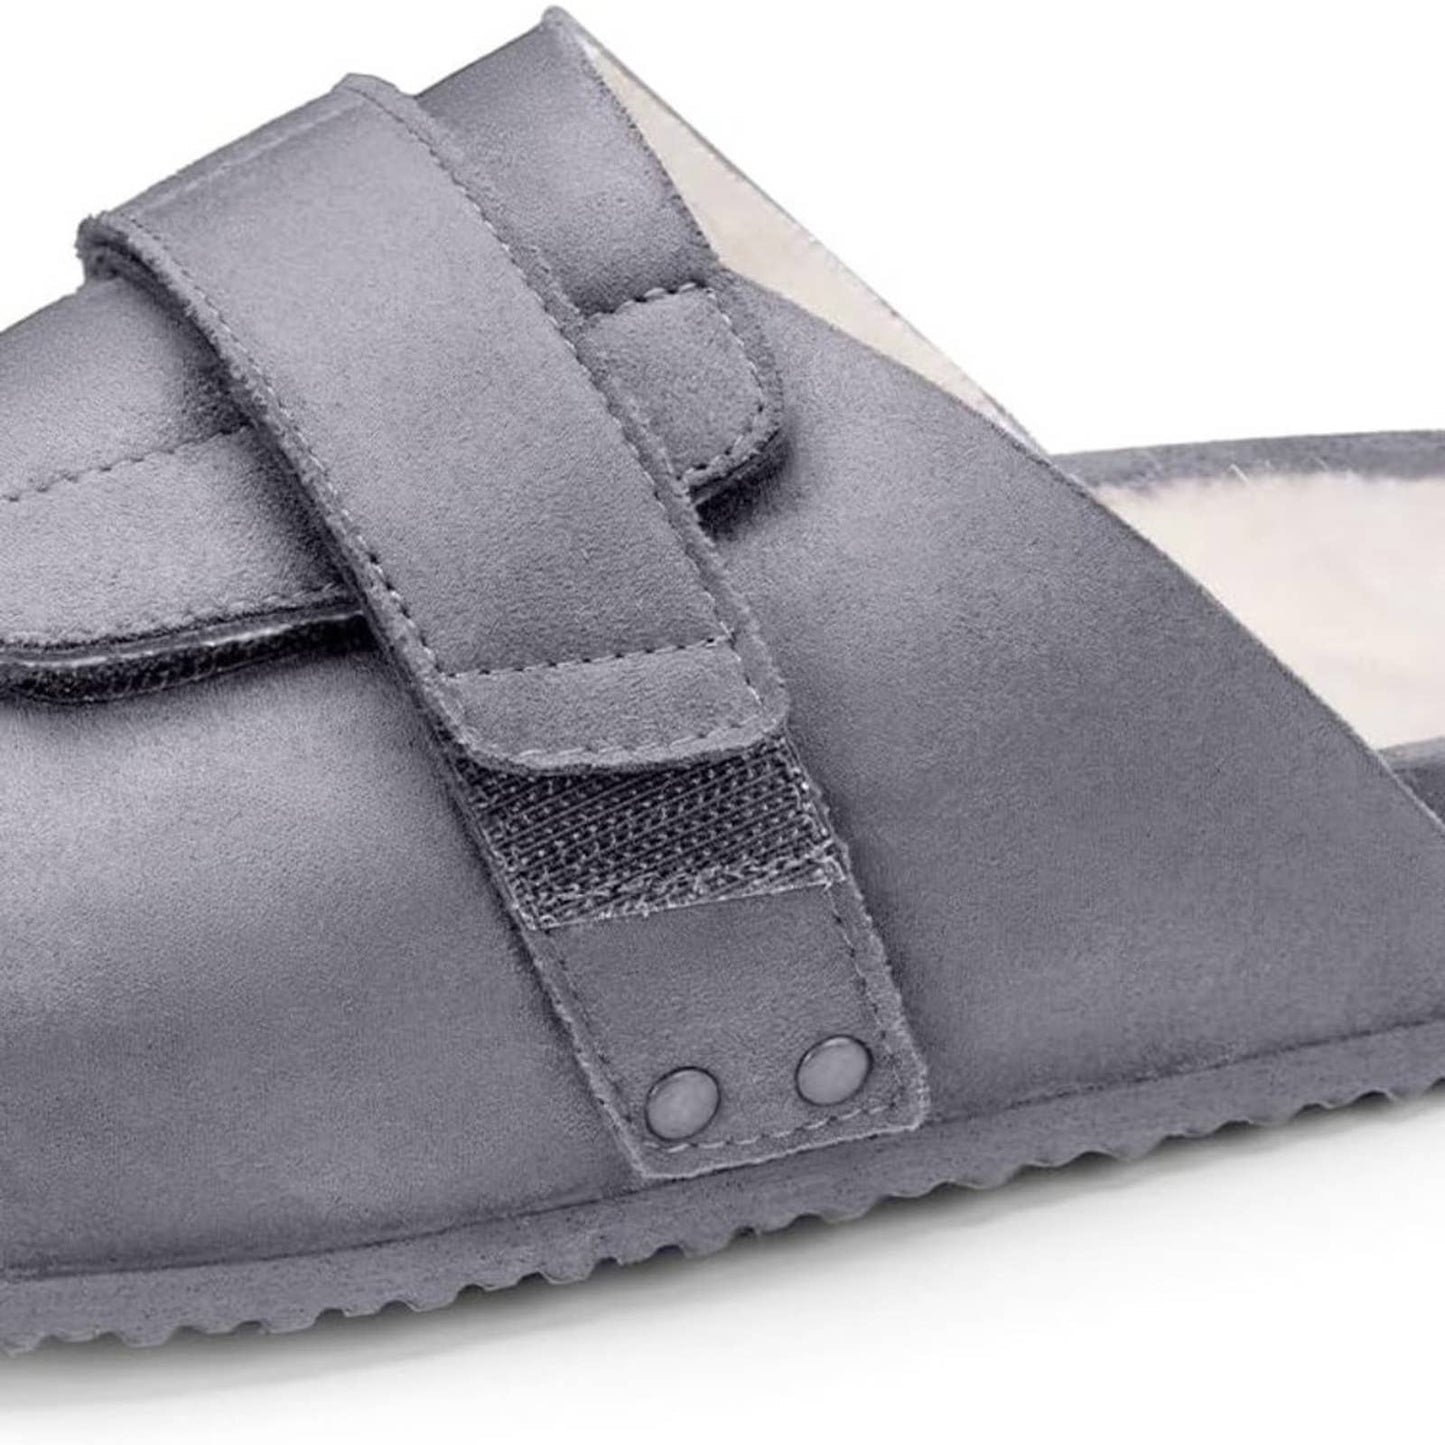 VEEYOO Women's Open Toe Slippers with Arch Support Size 8